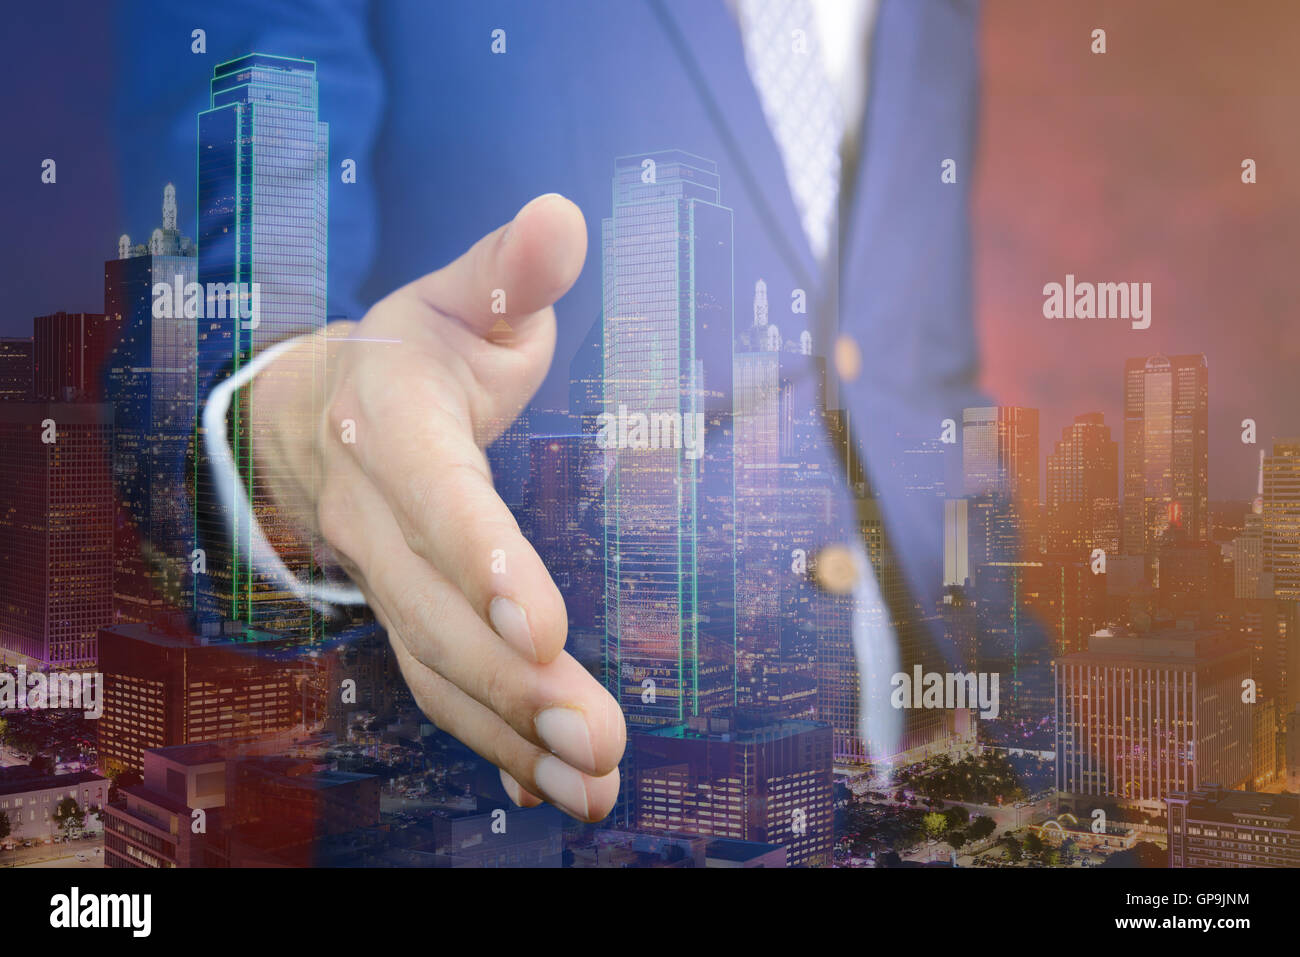 businessman in blue suit reaching hand to shake hands, make a business deal concept Stock Photo